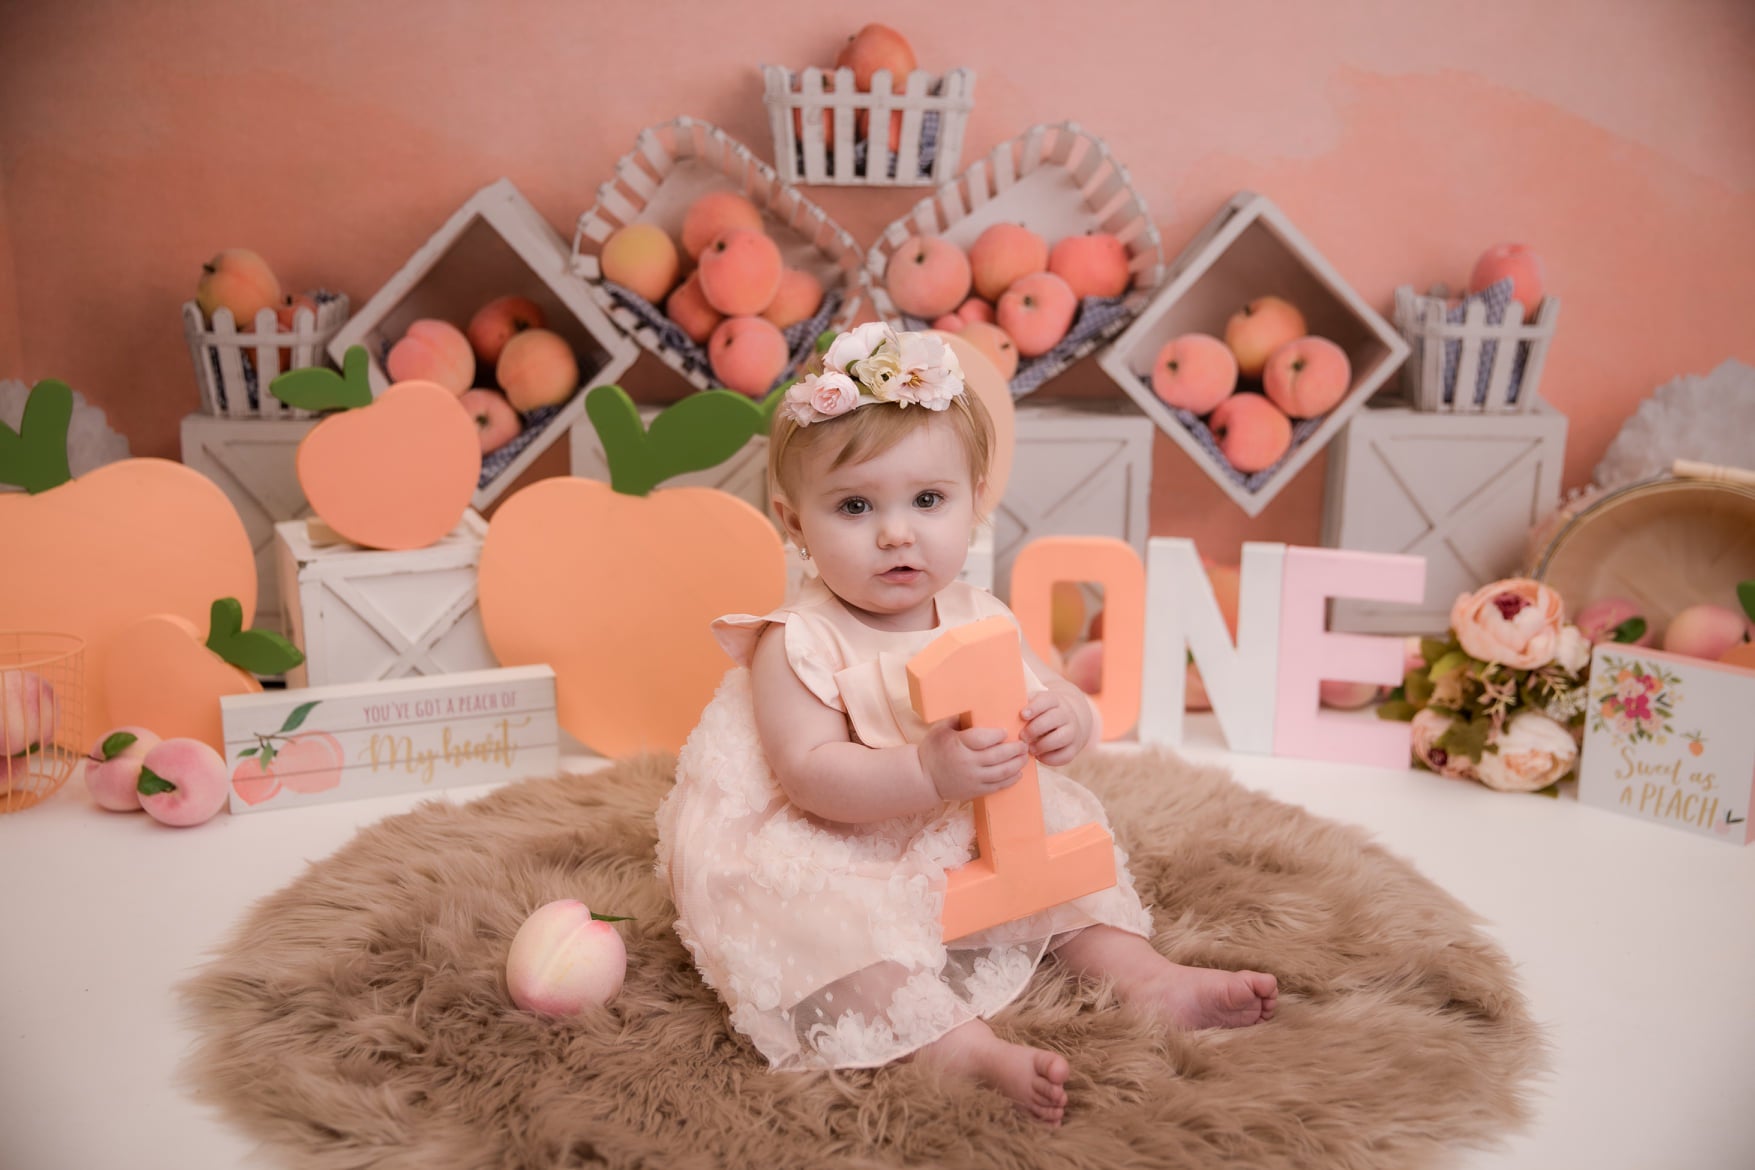 Kate Autumn Peaches and Cream Backdrop Designed By Mandy Ringe Photography